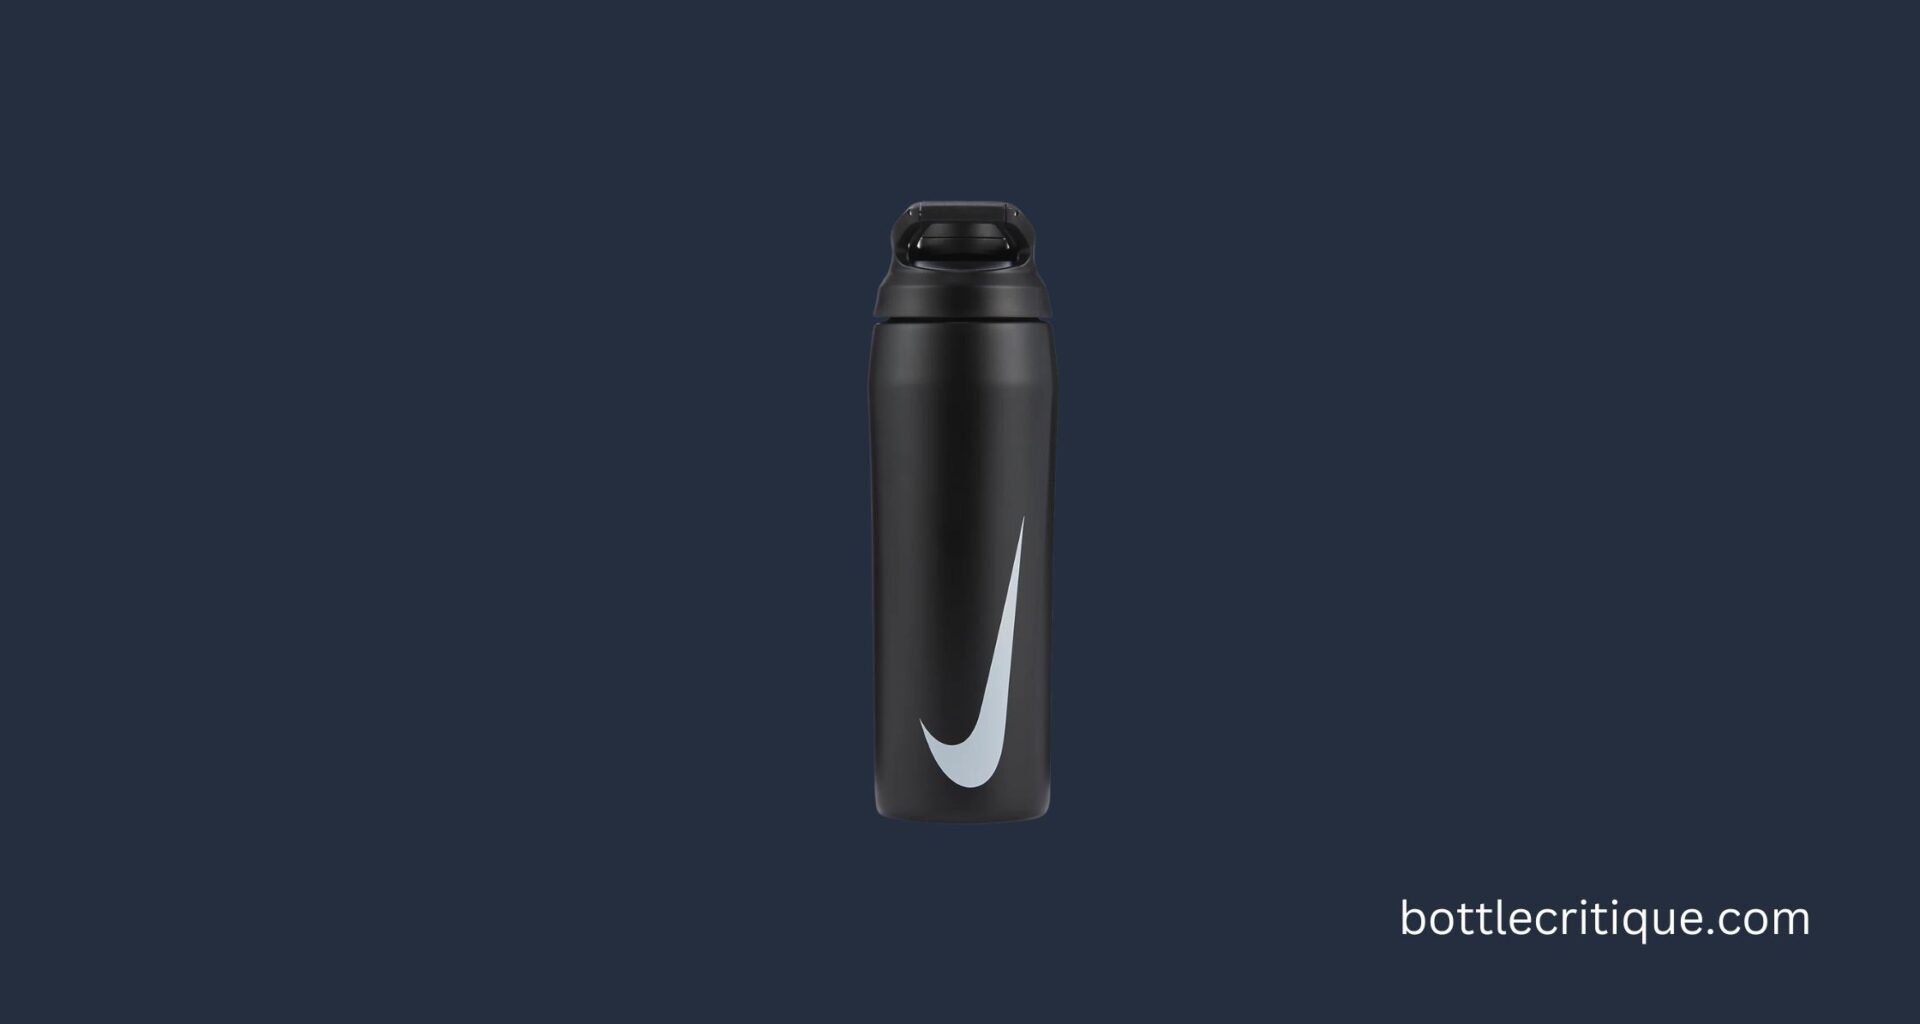 How to Use Nike Hypercharge Water Bottle?